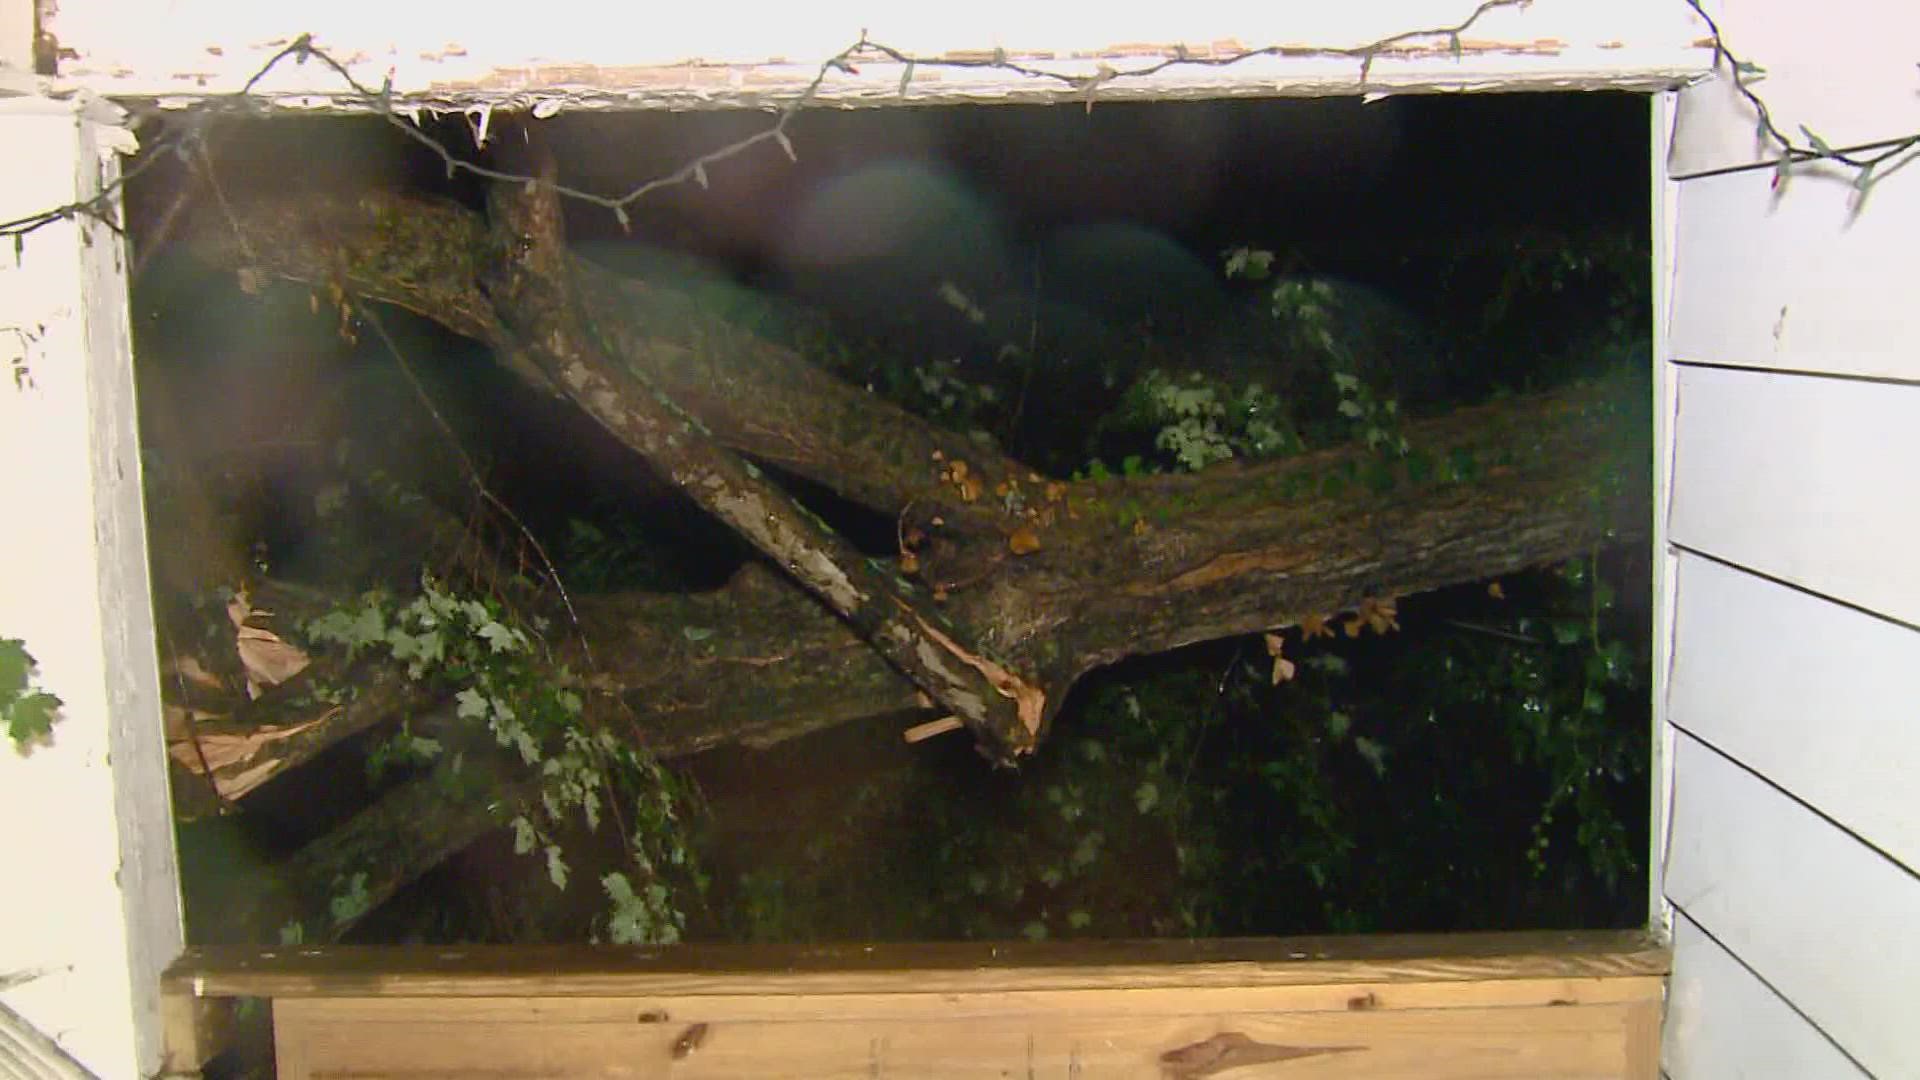 WFMY News 2 spoke to several people who had trees fall on their houses during the storm.